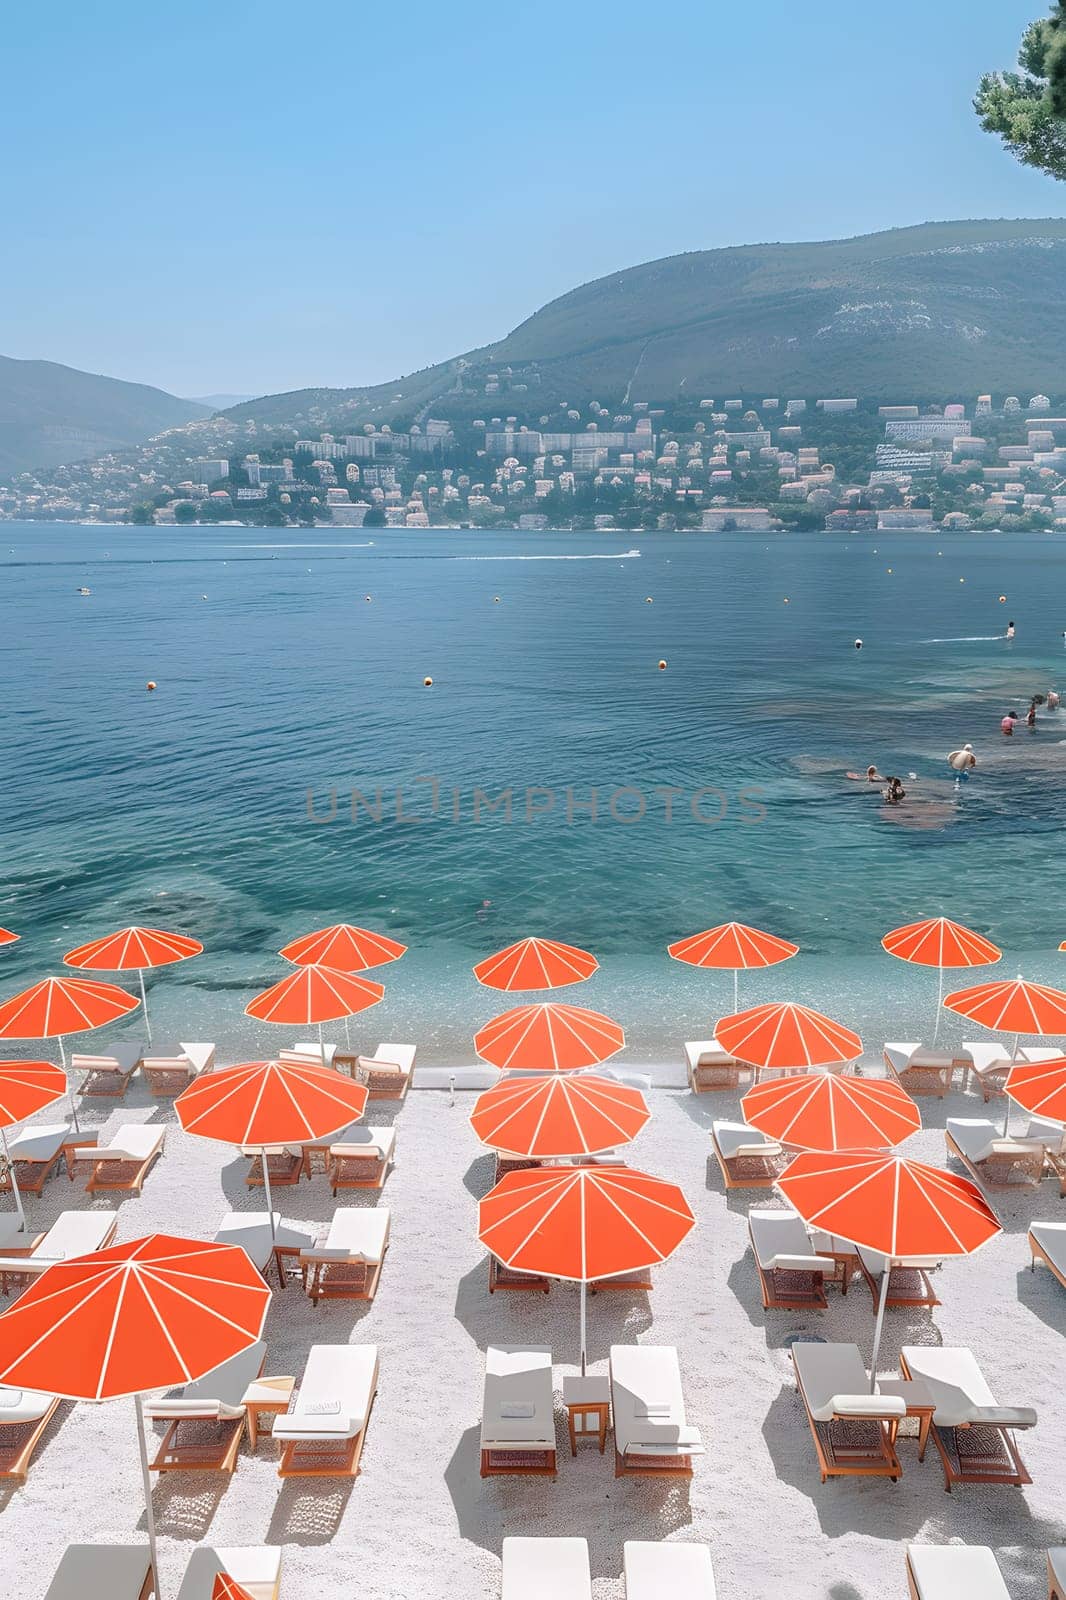 A stunning beach with numerous orange umbrellas and chairs, set against a backdrop of crystal clear water, blue skies, and majestic mountains. Perfect for leisure and relaxation